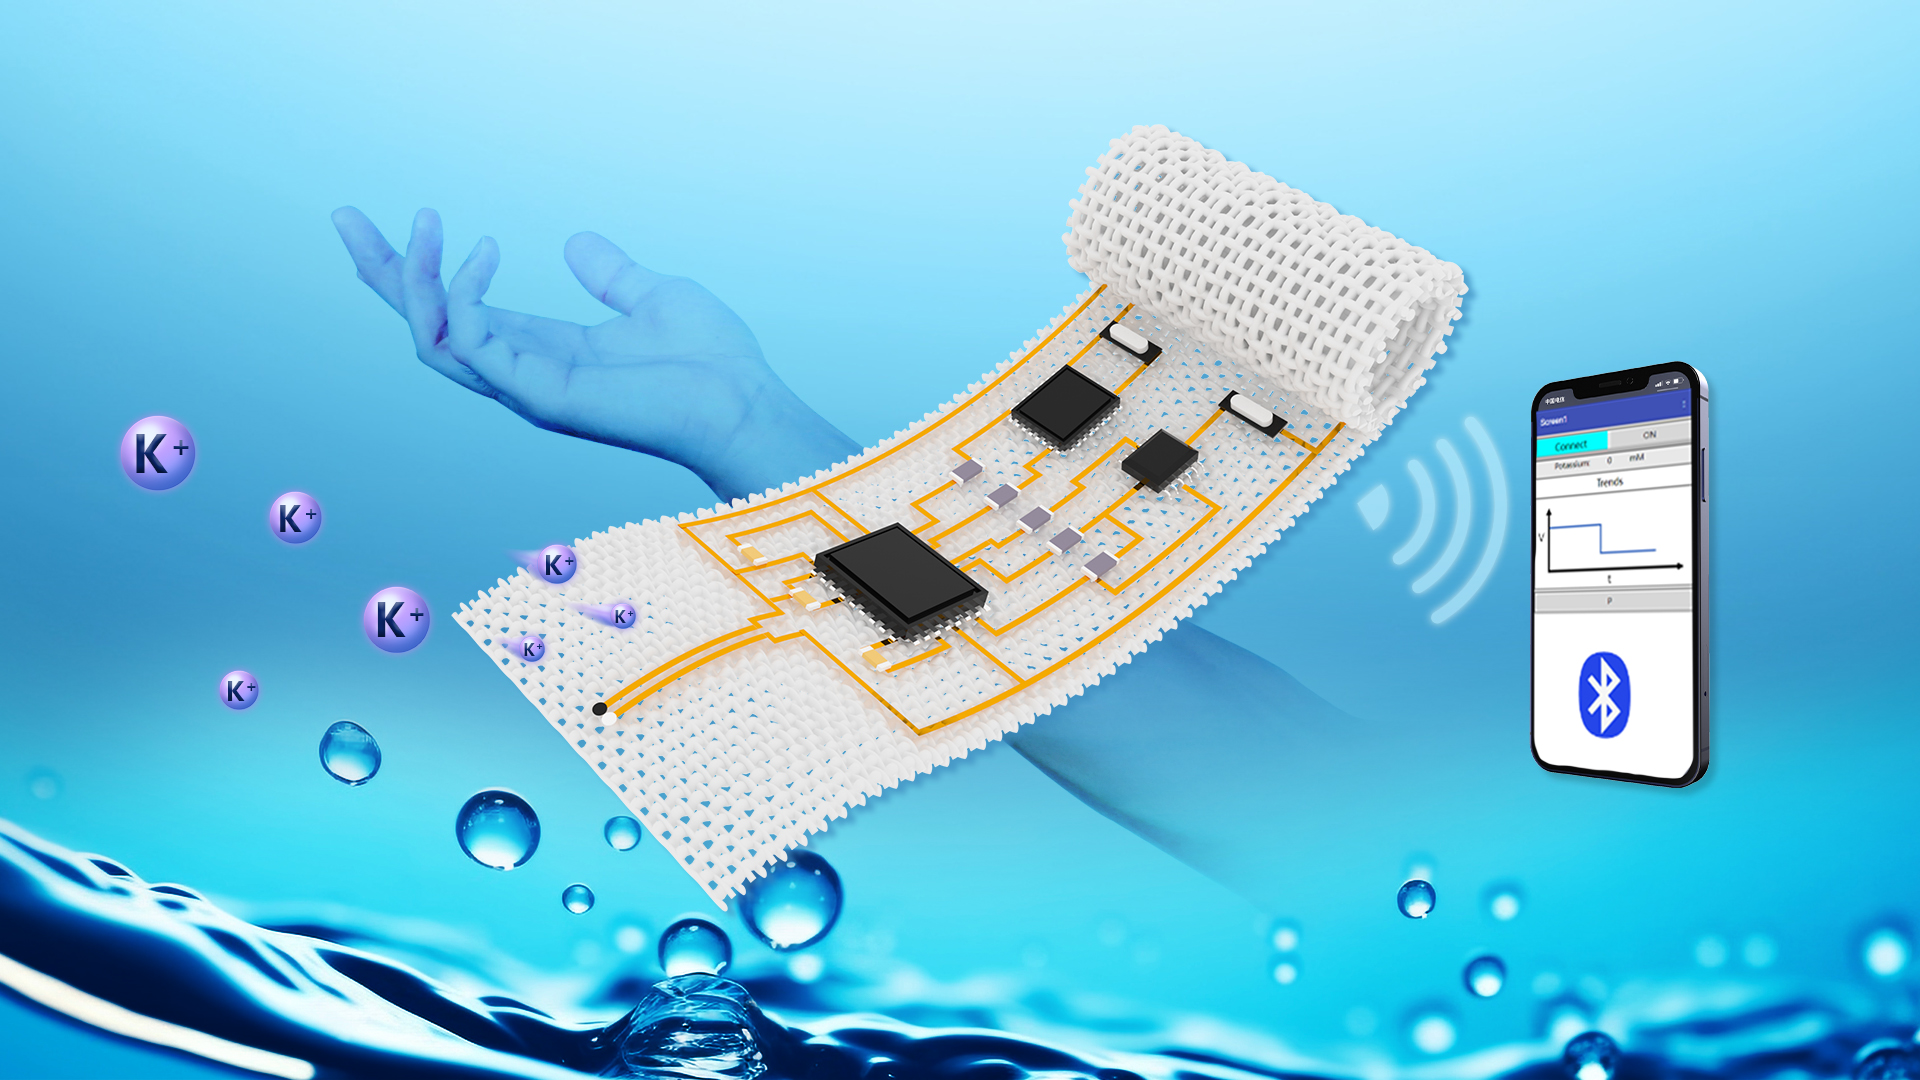 Researchers make advances in field of textile bioelectronics for wireless epidermal biosensing